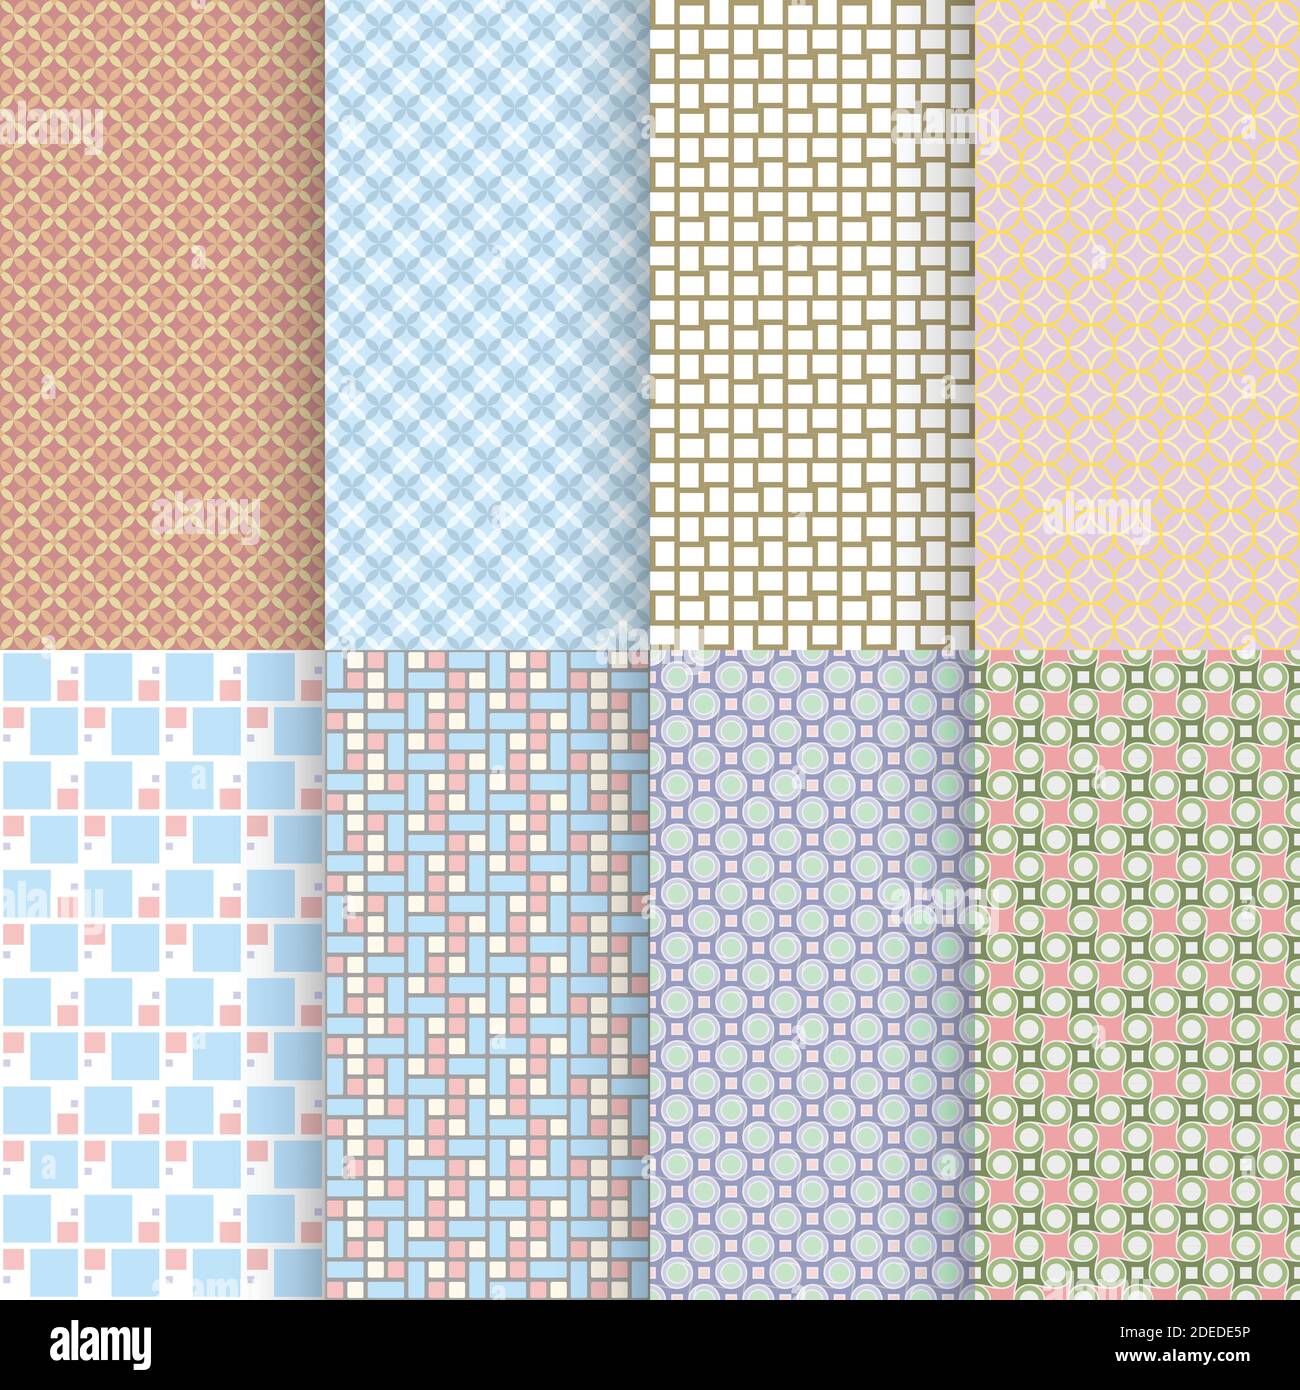 various colored floor tiles seamless back pattern Stock Vector